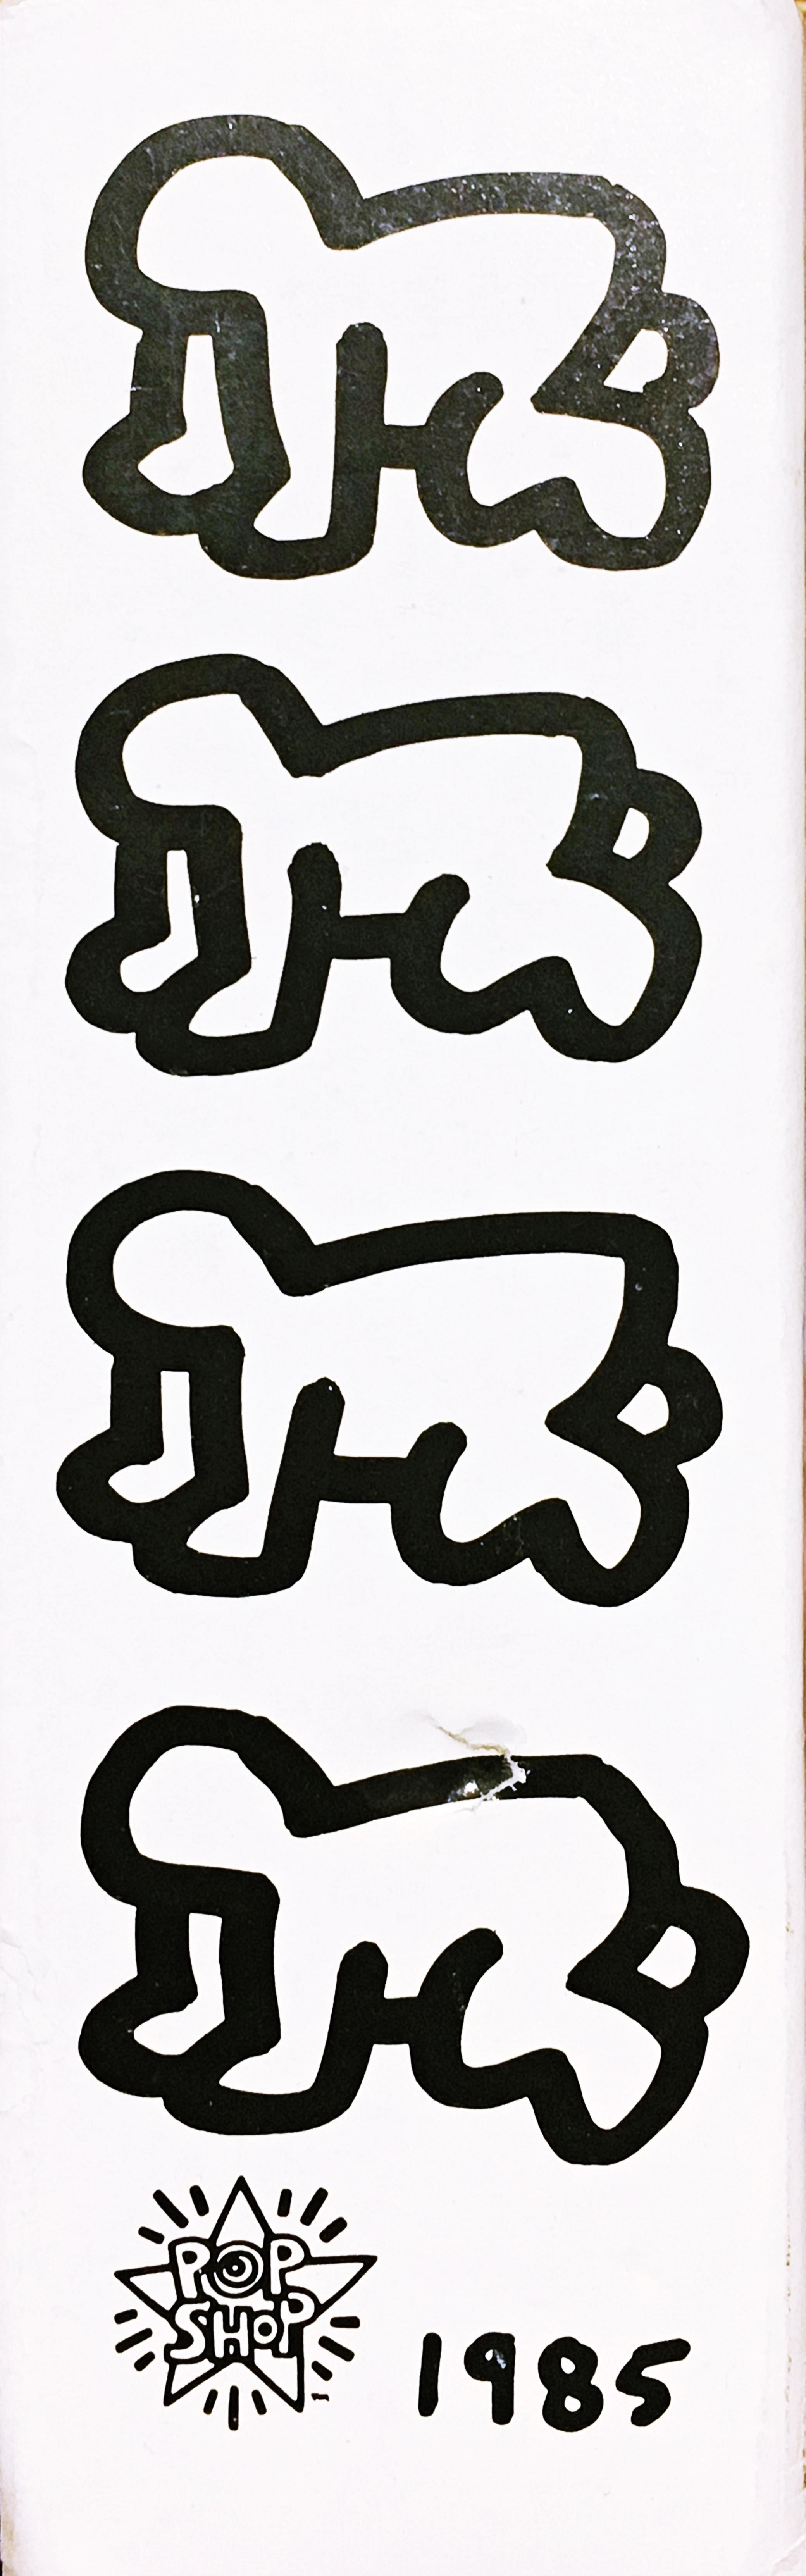 Keith Haring
Inflatable Baby (in original Pop Shop Box), 1985
Inflatable Vinyl Figure
Authorized artist signature on outside of box.
6 × 6 9/10 × 2 1/5 inches
Unframed
Keith Haring’s Pop Shops were born out of the artist’s desire to make his